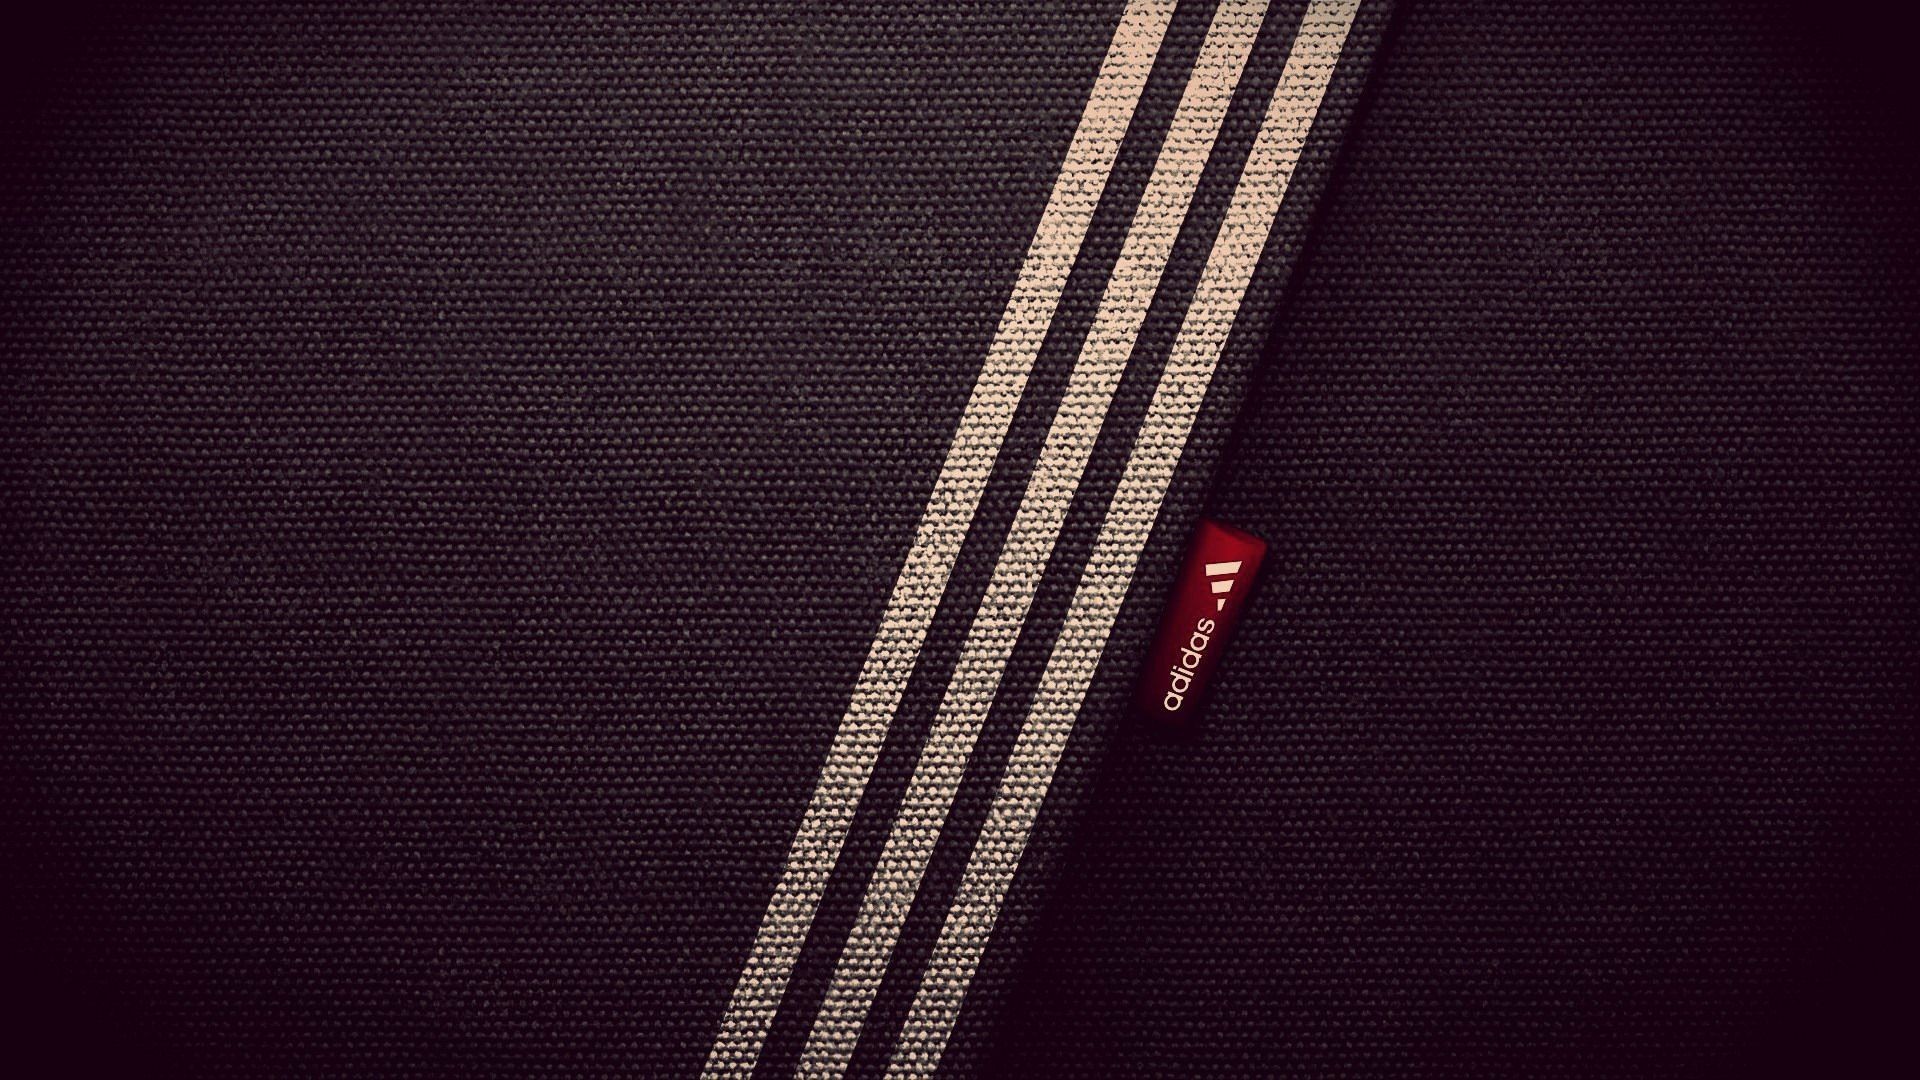 1920x1080 HD Adidas 4k Image for Iphone